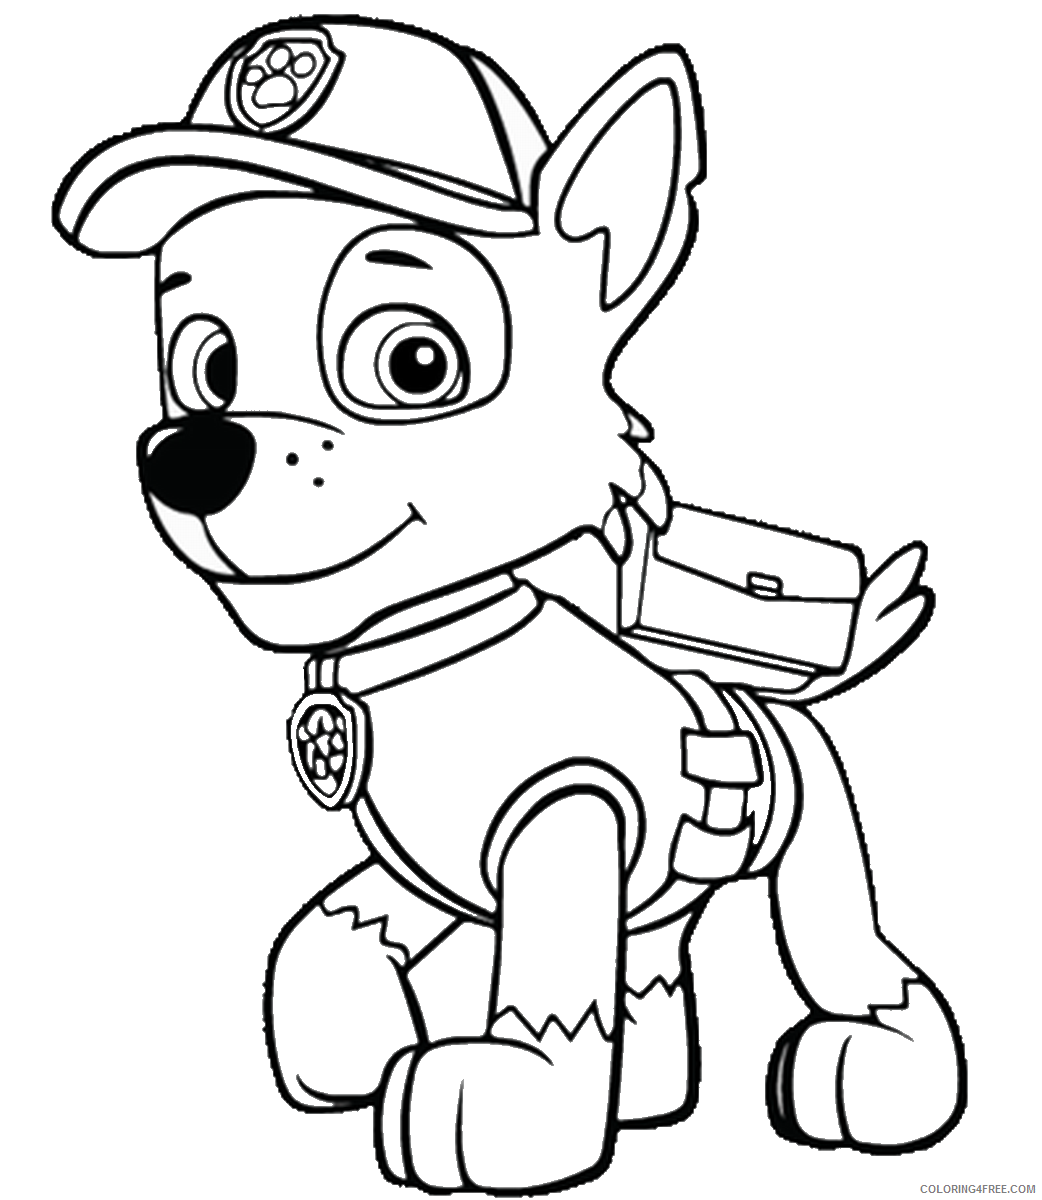 Paw Patrol Coloring Pages TV Film Printable 2020 05933 Coloring4free